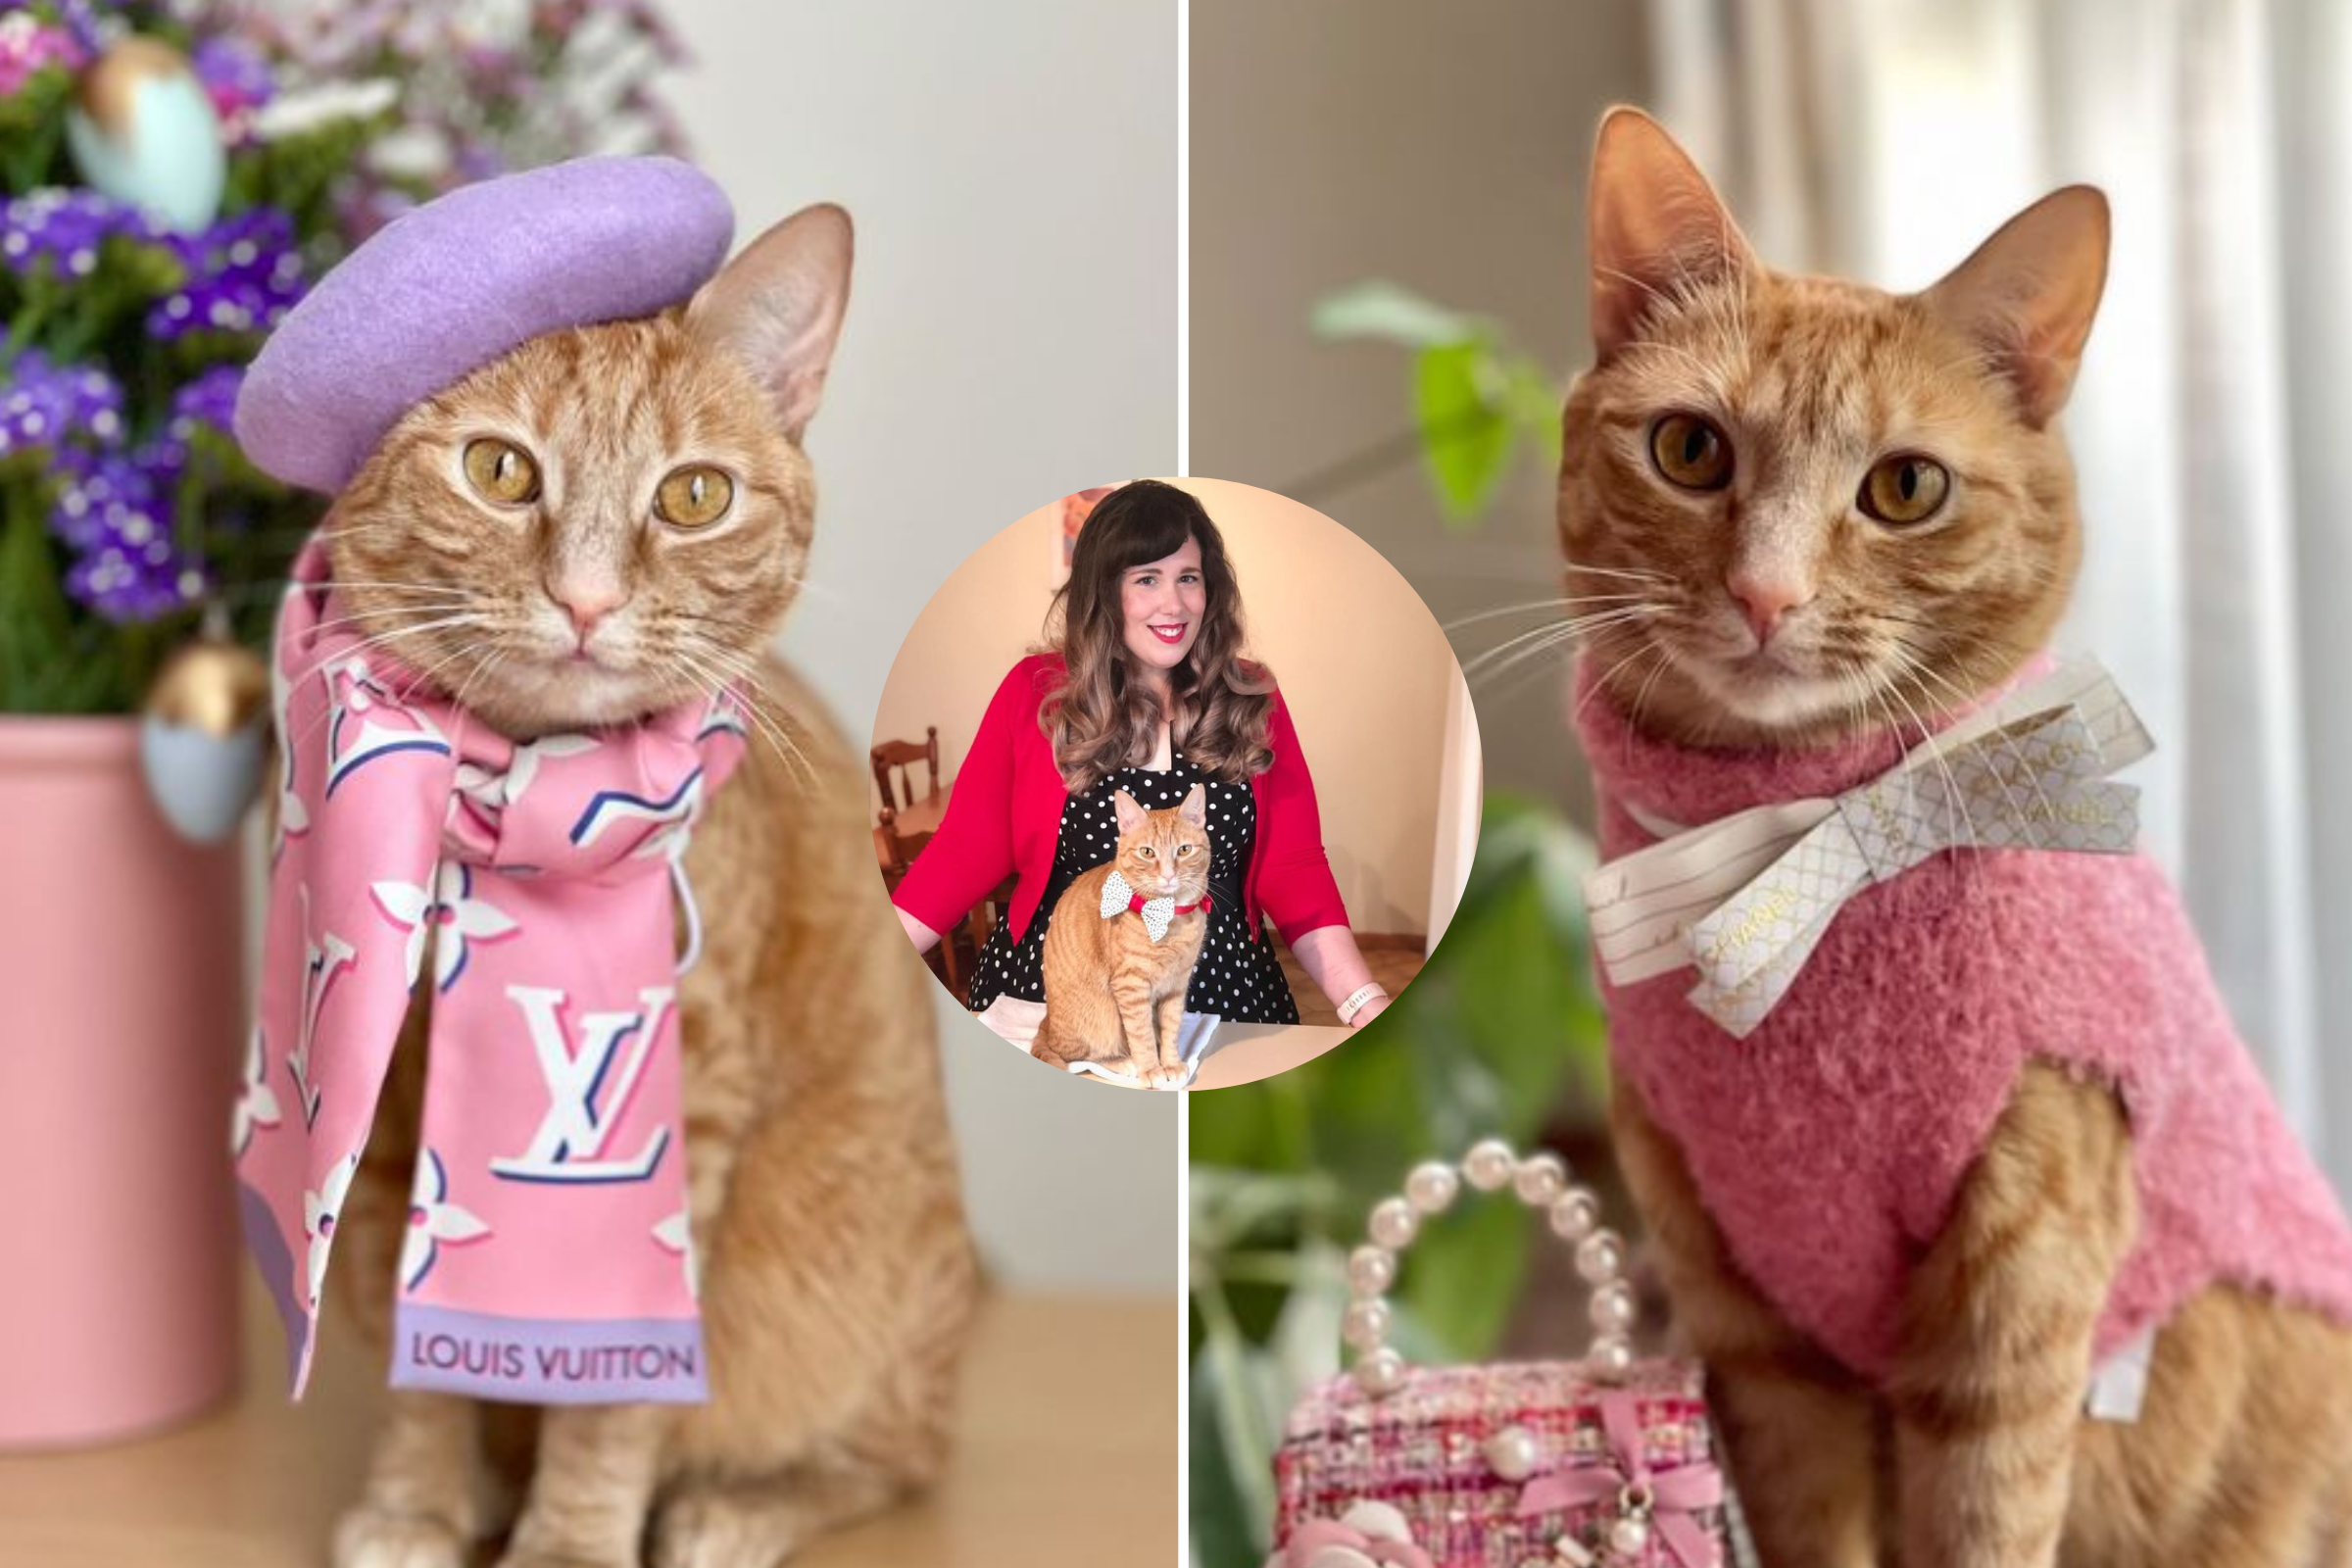 Woman Shows Off Rescue Cat's 'Princess Bedroom' and $5K Designer Wardrobe